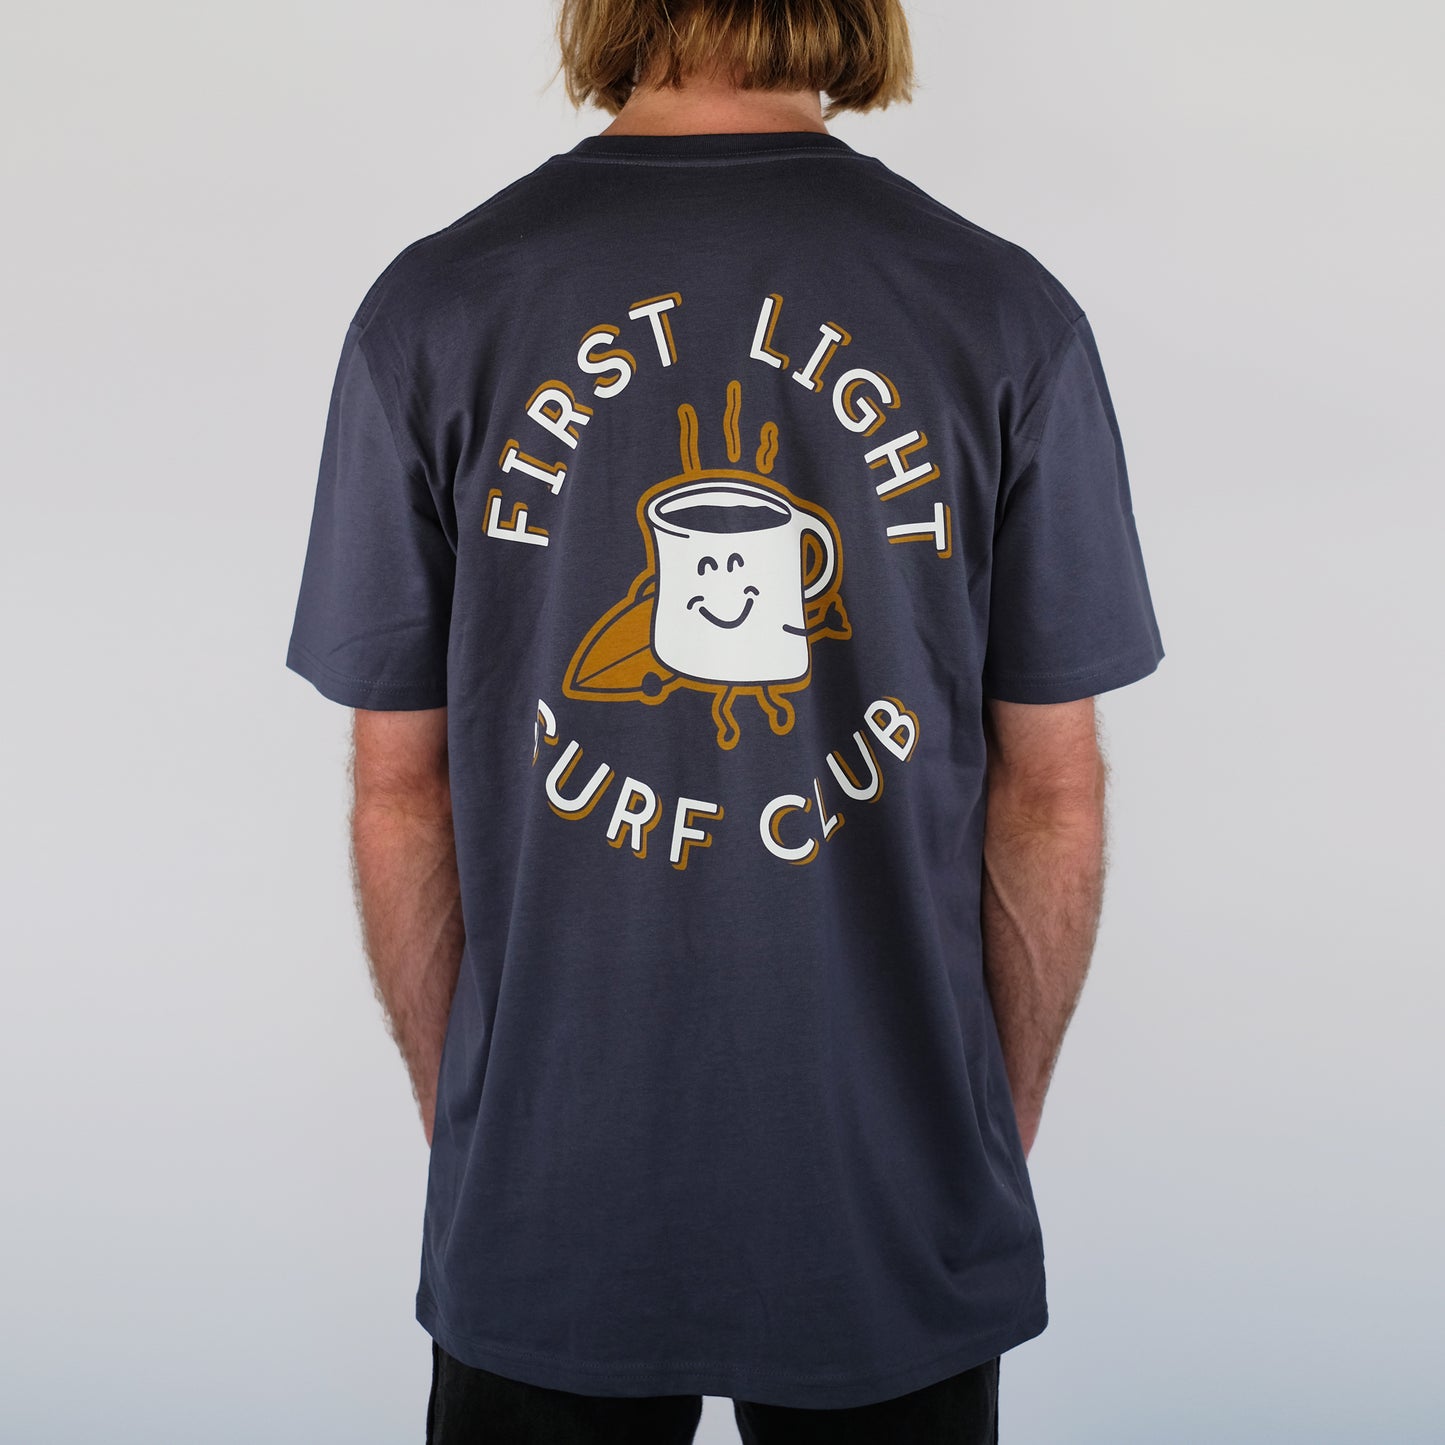 Model is 6'1" and is wearing a size Large. Petrol Blue First Light Surf Club Coffee Mug Surfing Tee Shirt